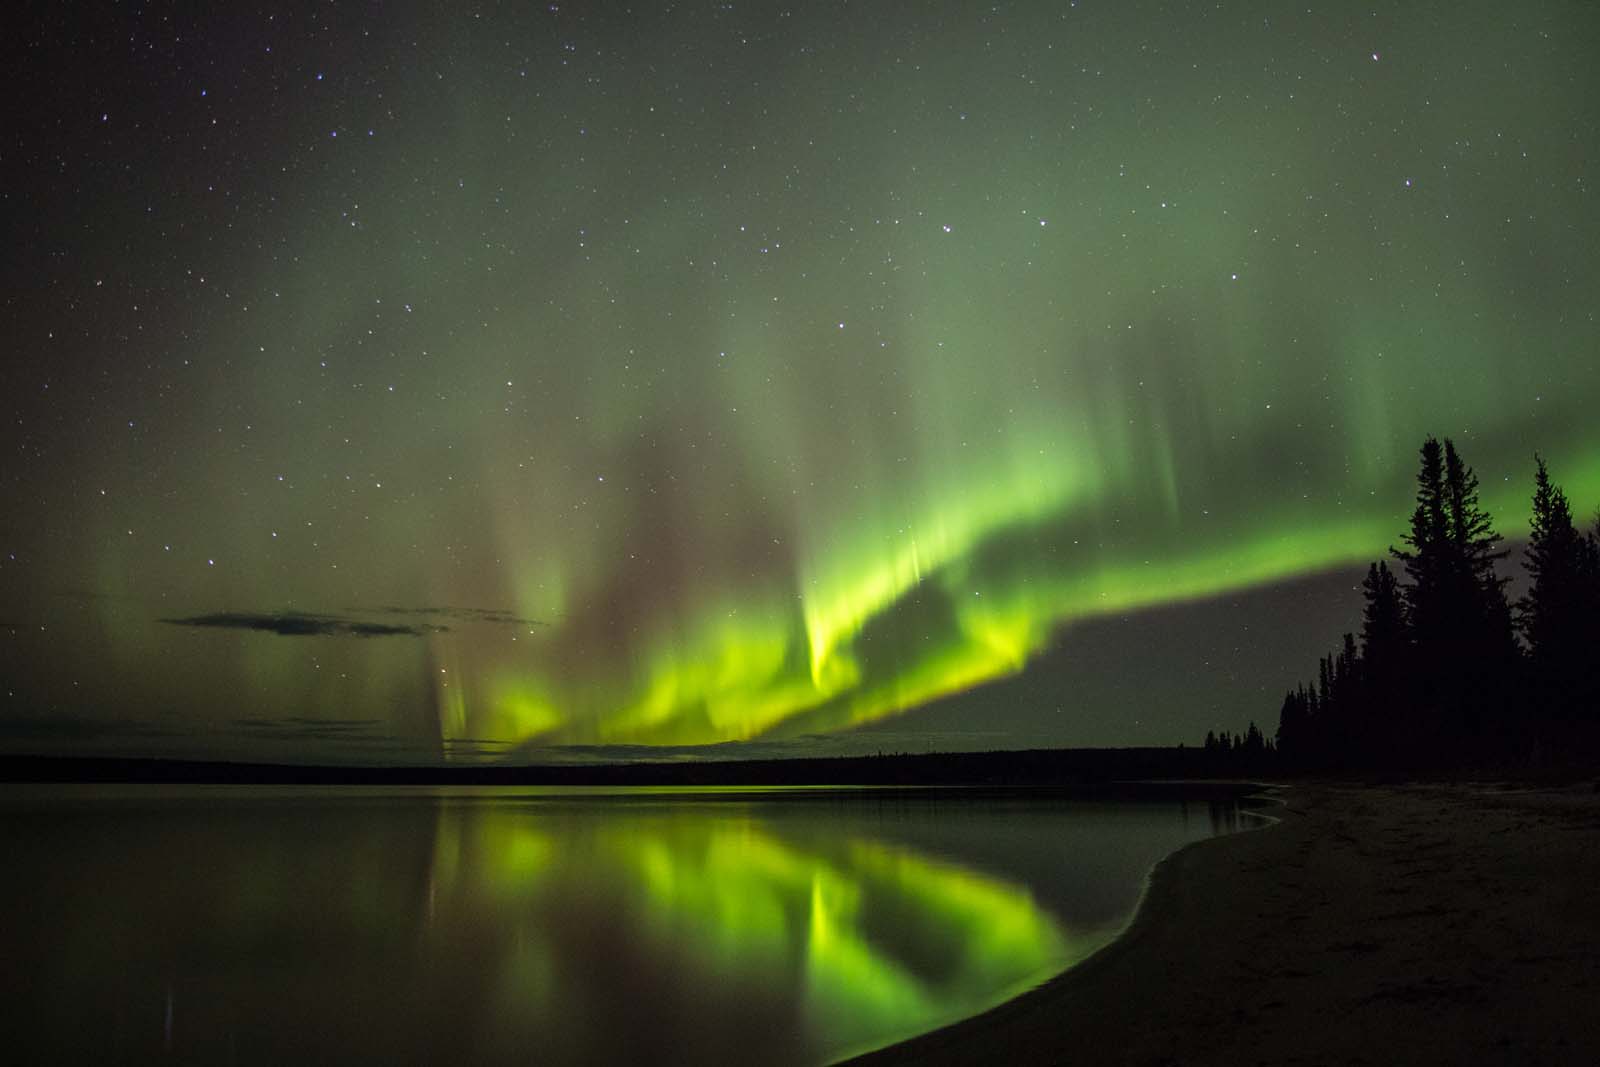 Tips for viewing the Northern Lights in Ontario